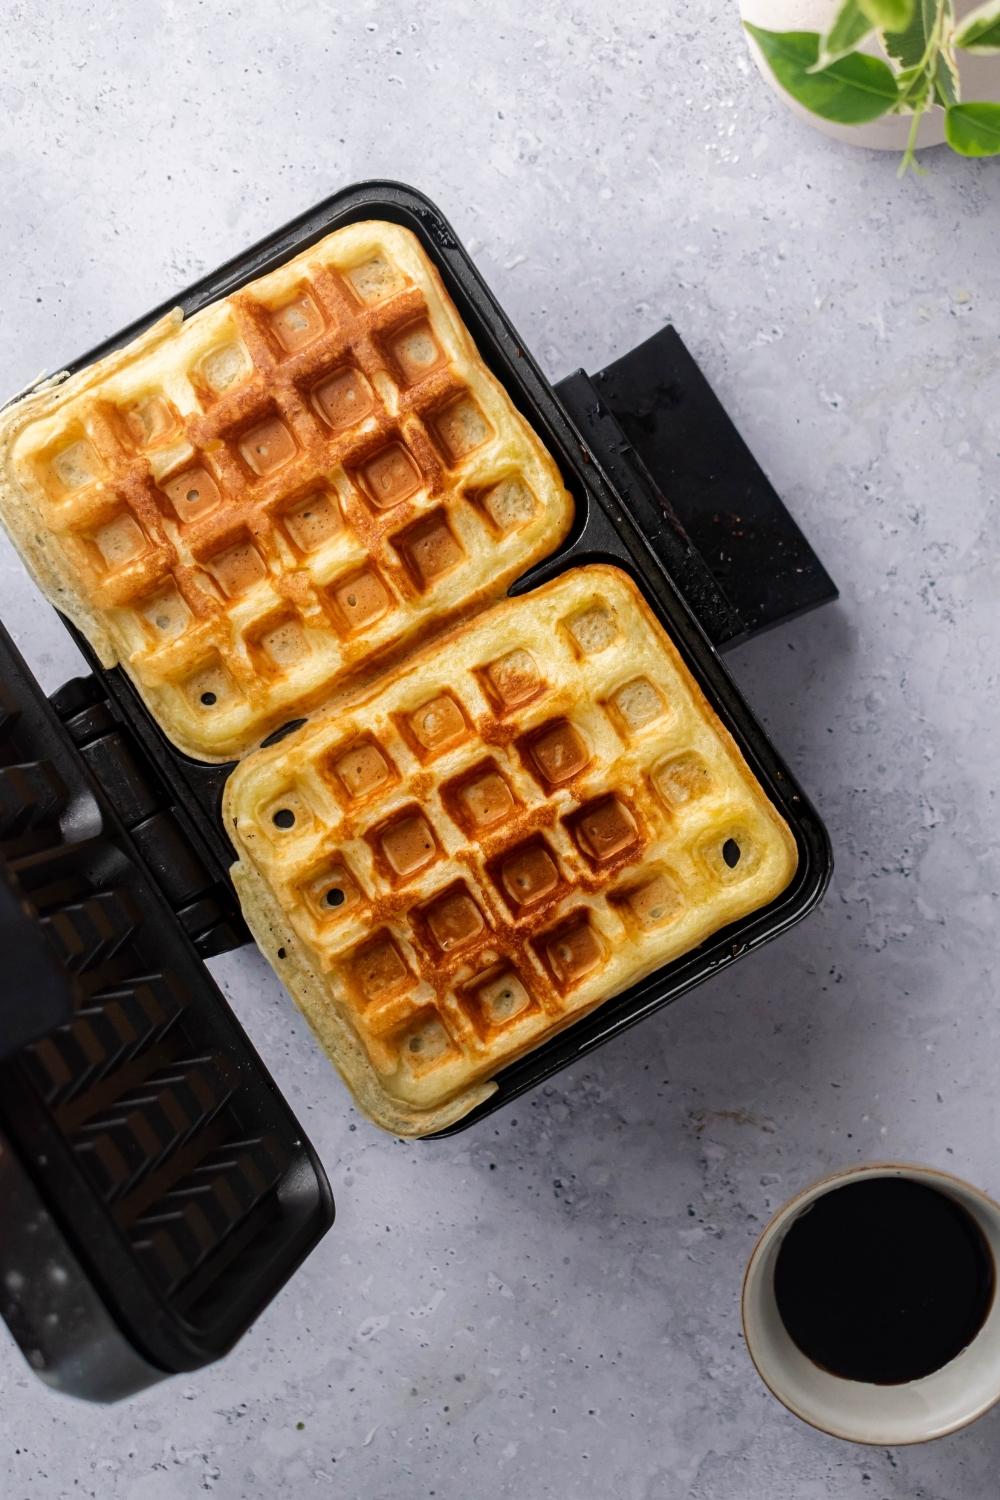 And opened waffle iron with two cooked waffles in it.